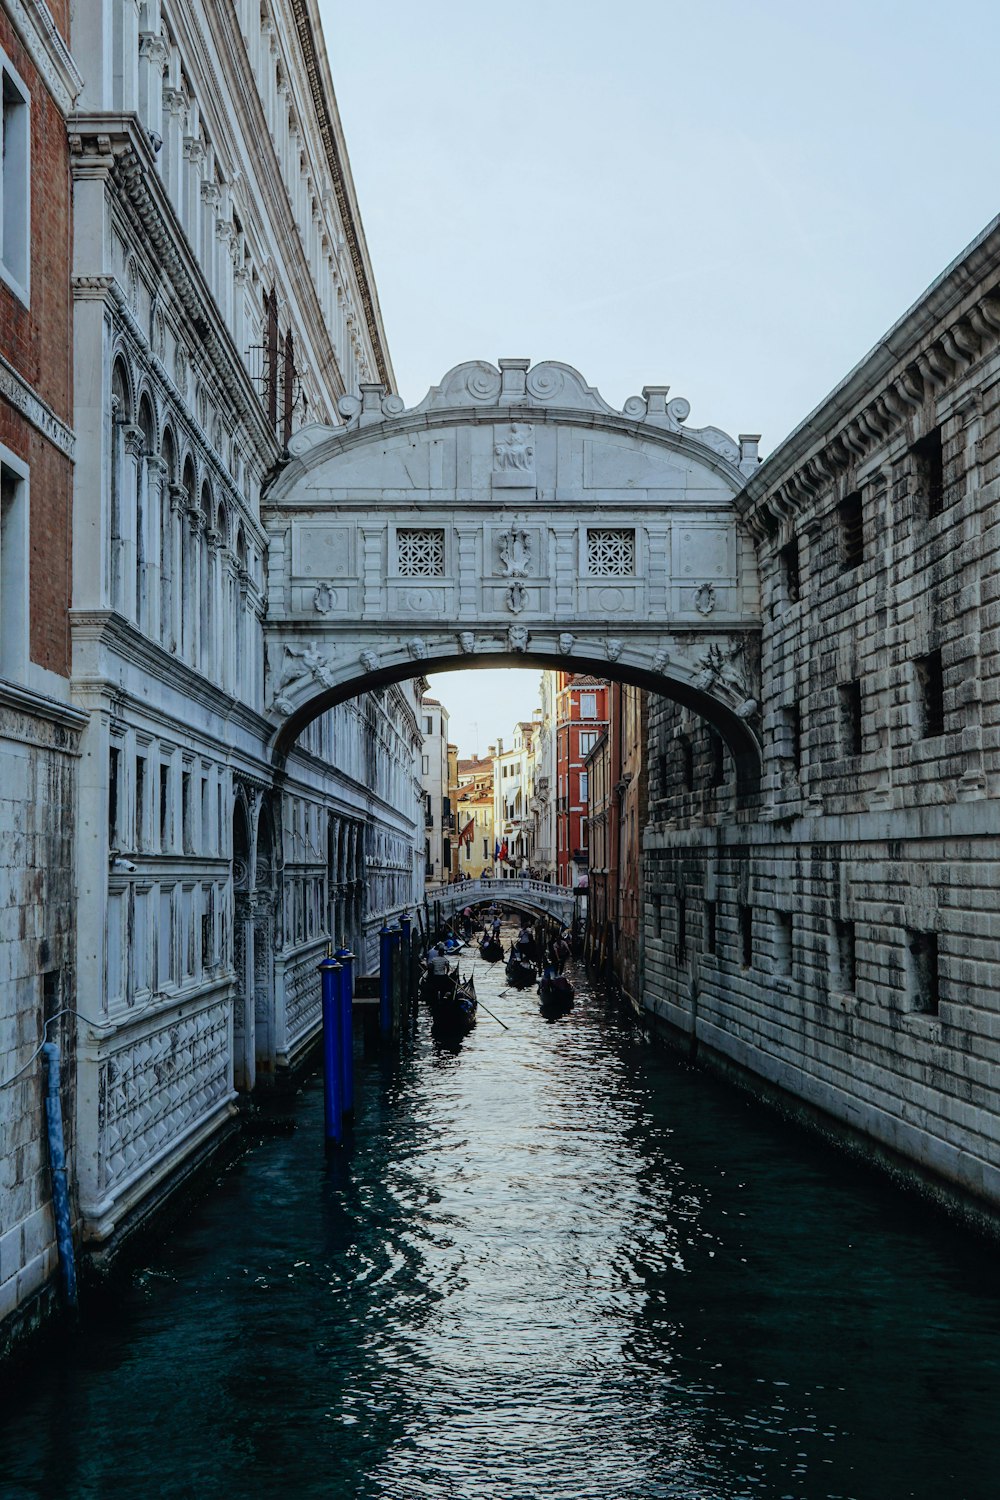 a bridge over a canal in a city